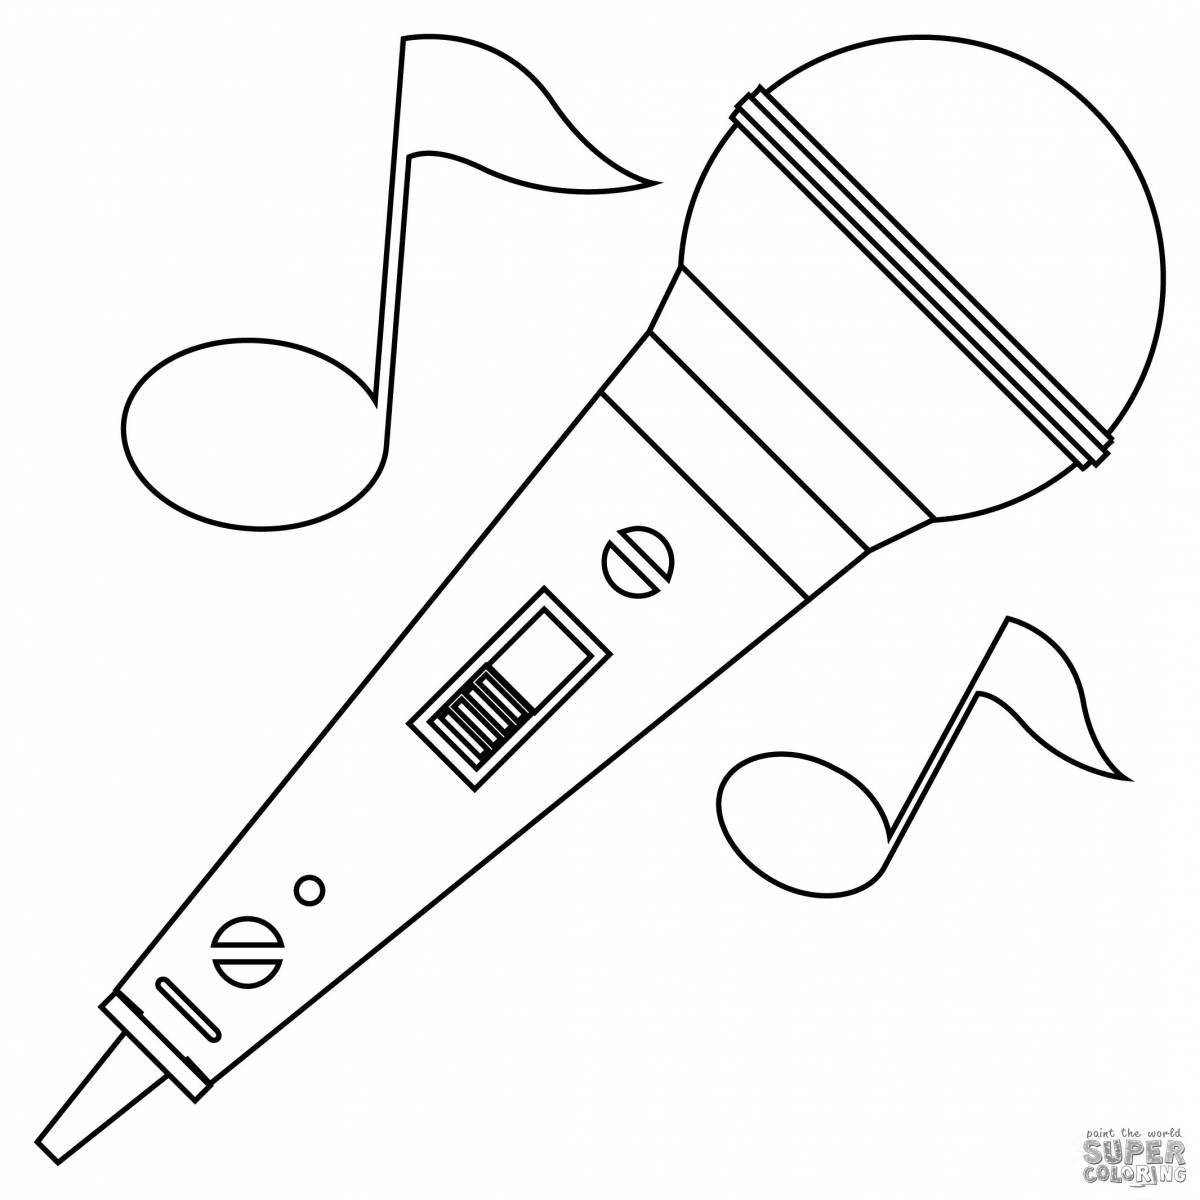 Cute microphone coloring page for kids